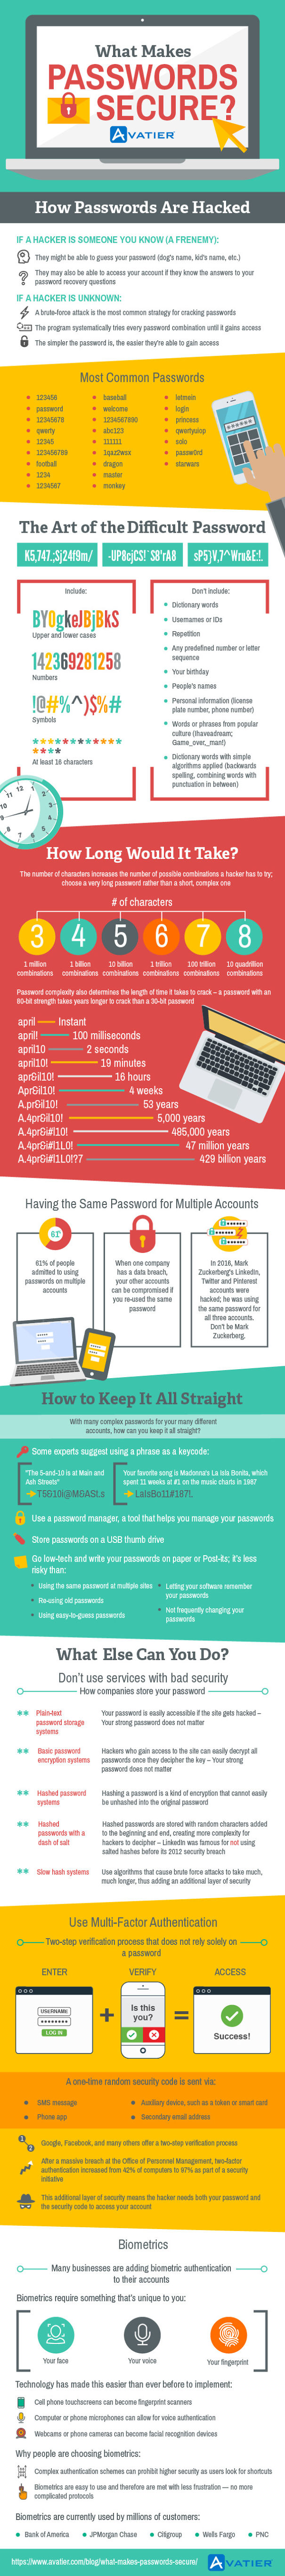 What Makes Passwords Secure?